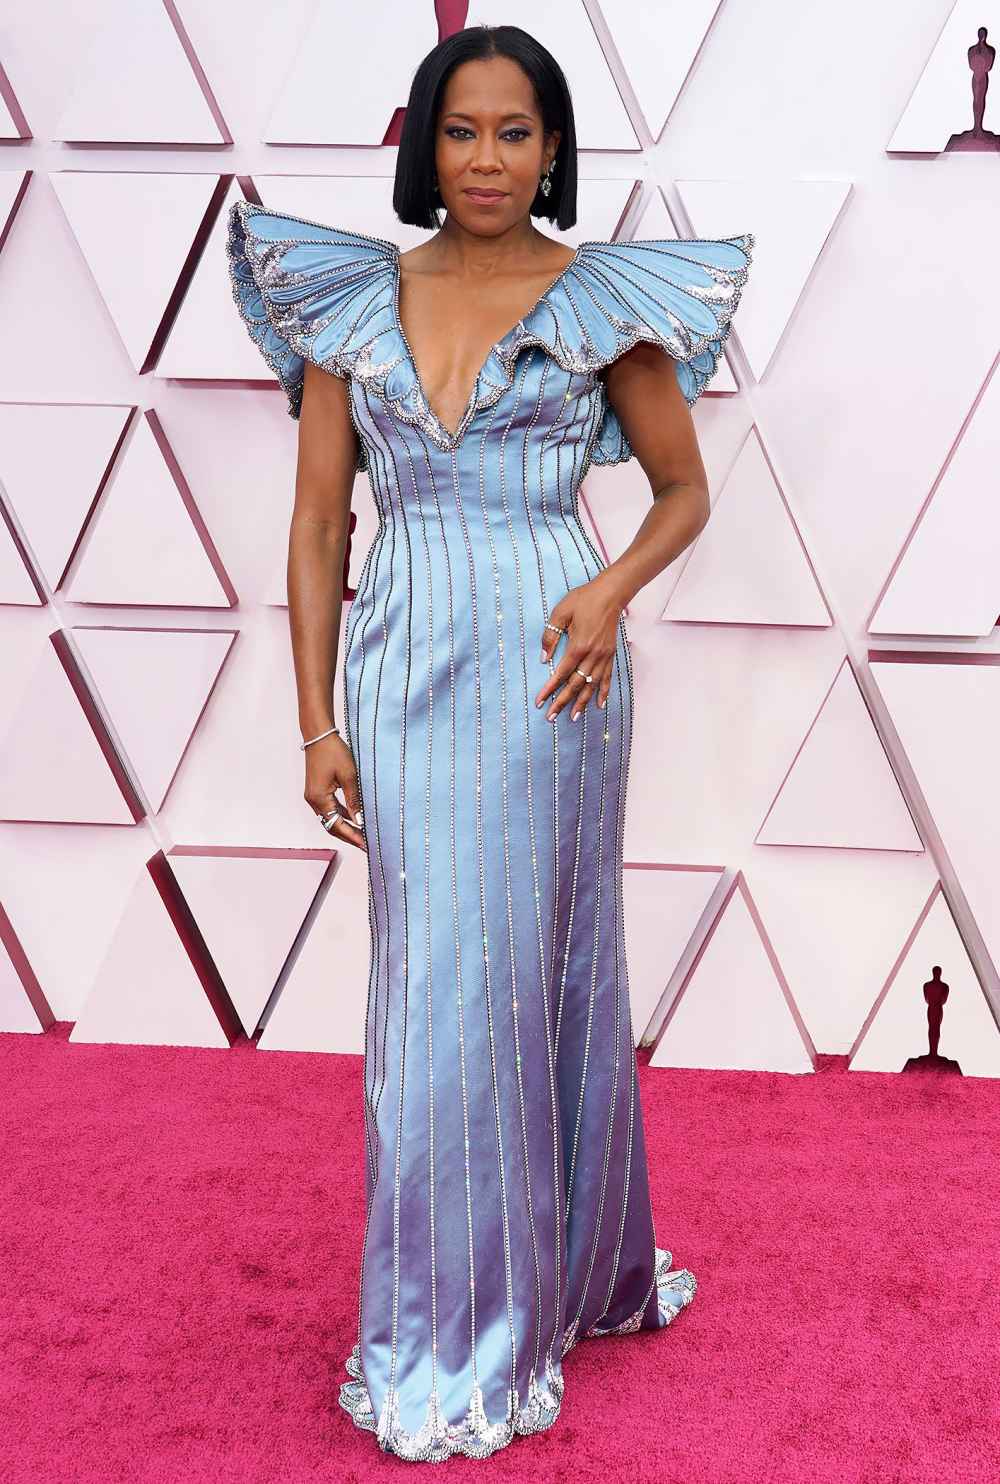 Top 5 Best Dressed Stars at the Academy Awards — Watch!